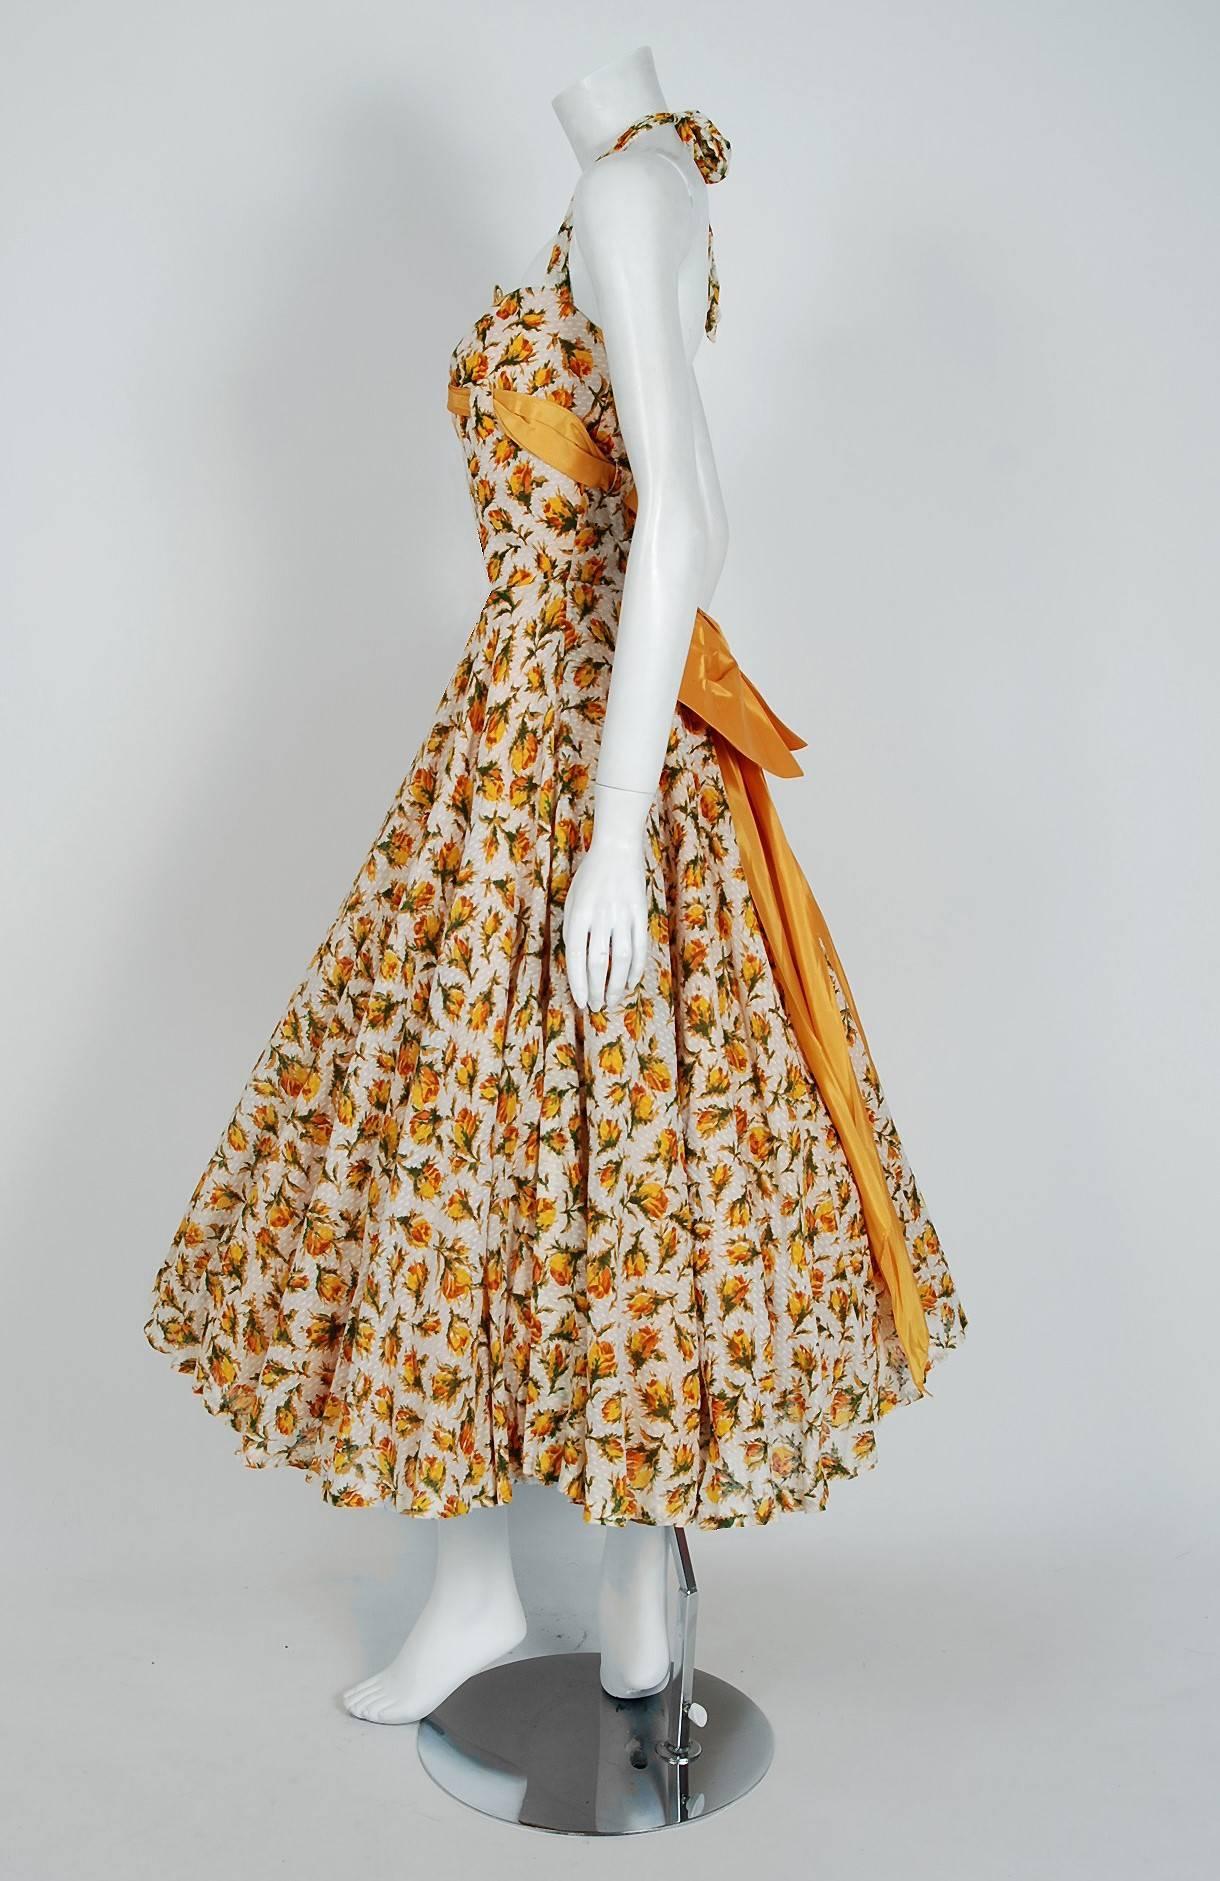 An amazing and highly stylized 1950's sundress by Lilli Diamond. With its gorgeous marigold-yellow roses floral print and flawless styling, this garment has the casual elegance the 1950's were known for. The low-cut scalloped plunge halter bodice is